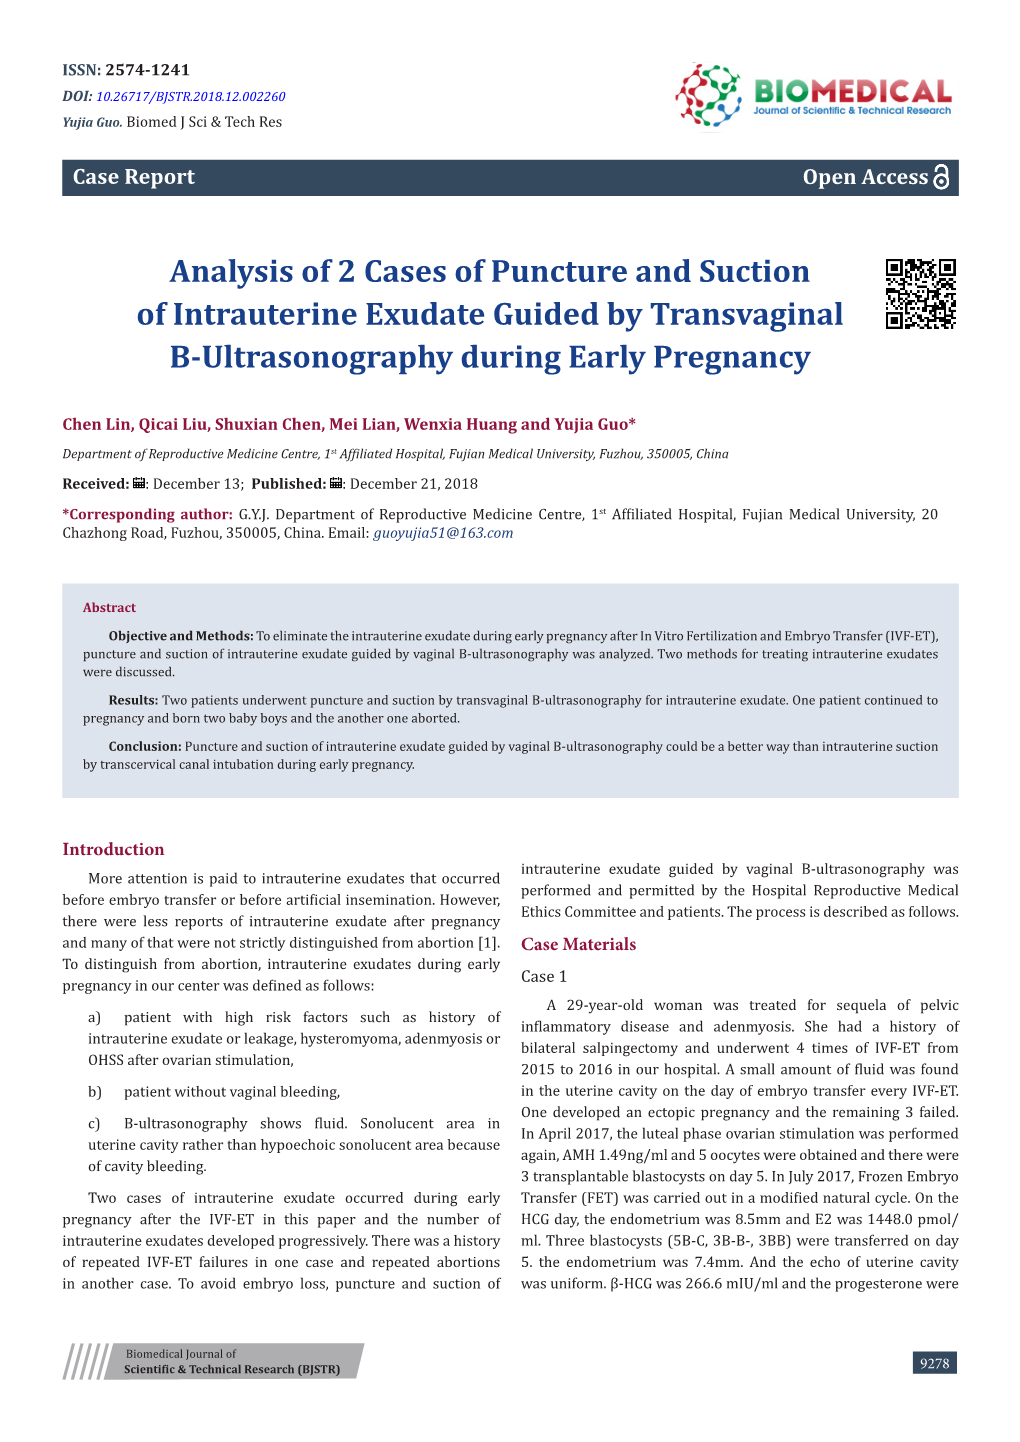 Analysis of 2 Cases of Puncture and Suction of Intrauterine Exudate Guided by Transvaginal B-Ultrasonography During Early Pregnancy